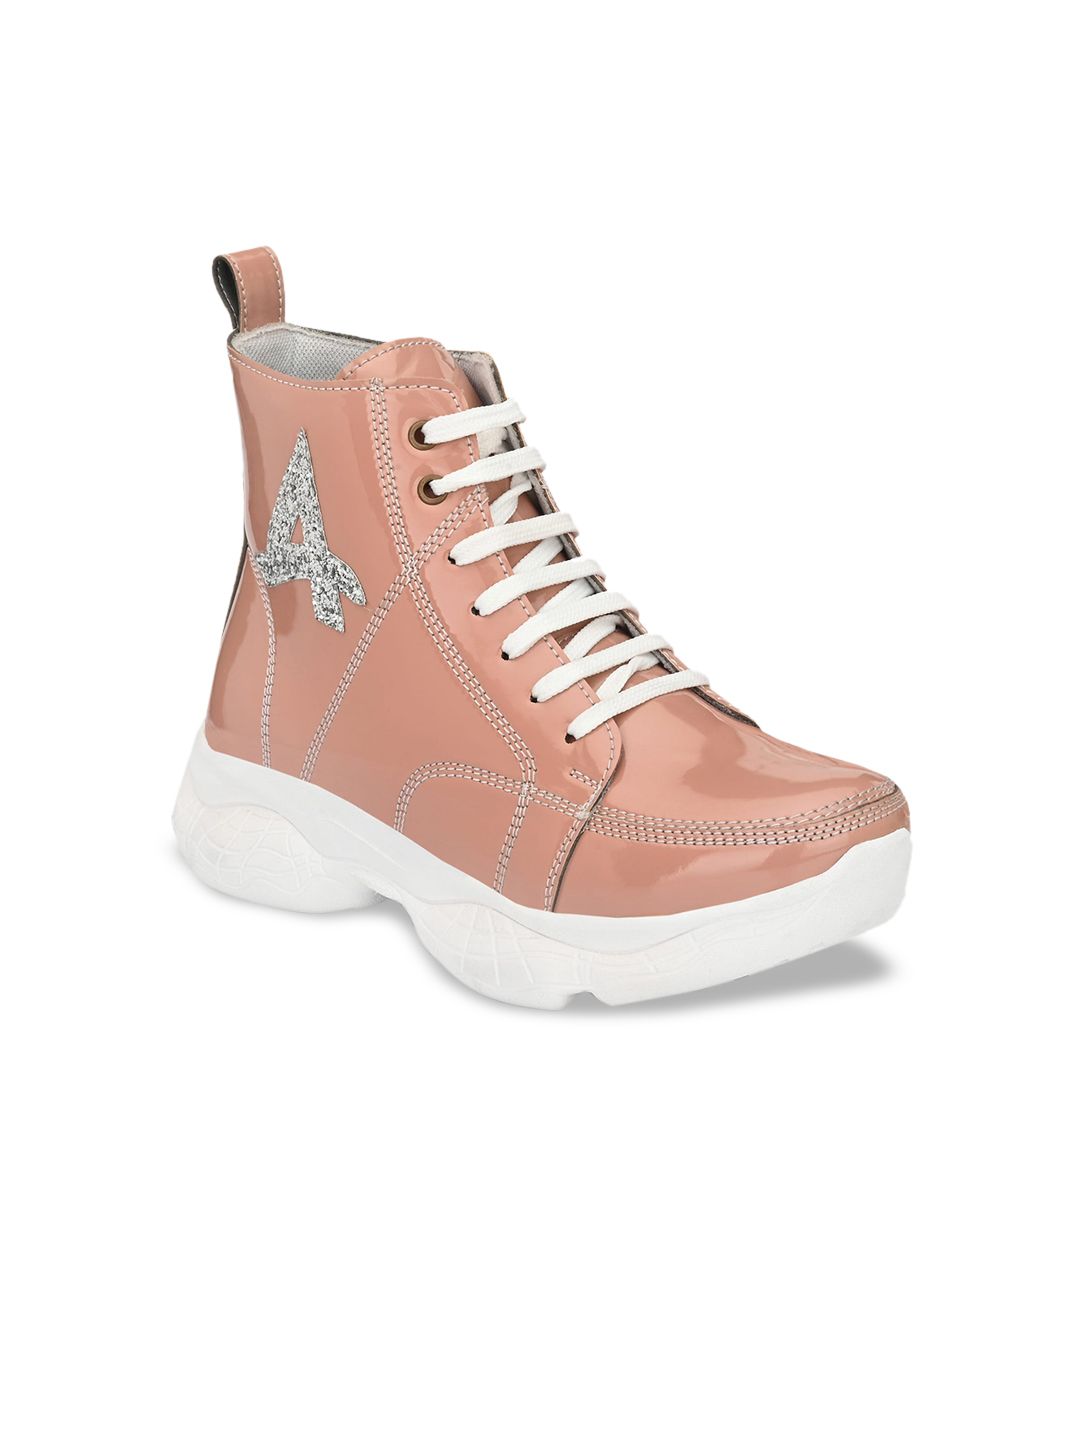 AfroJack Women Pink & White Mid-Top Synthetic Leather Sneakers Price in India